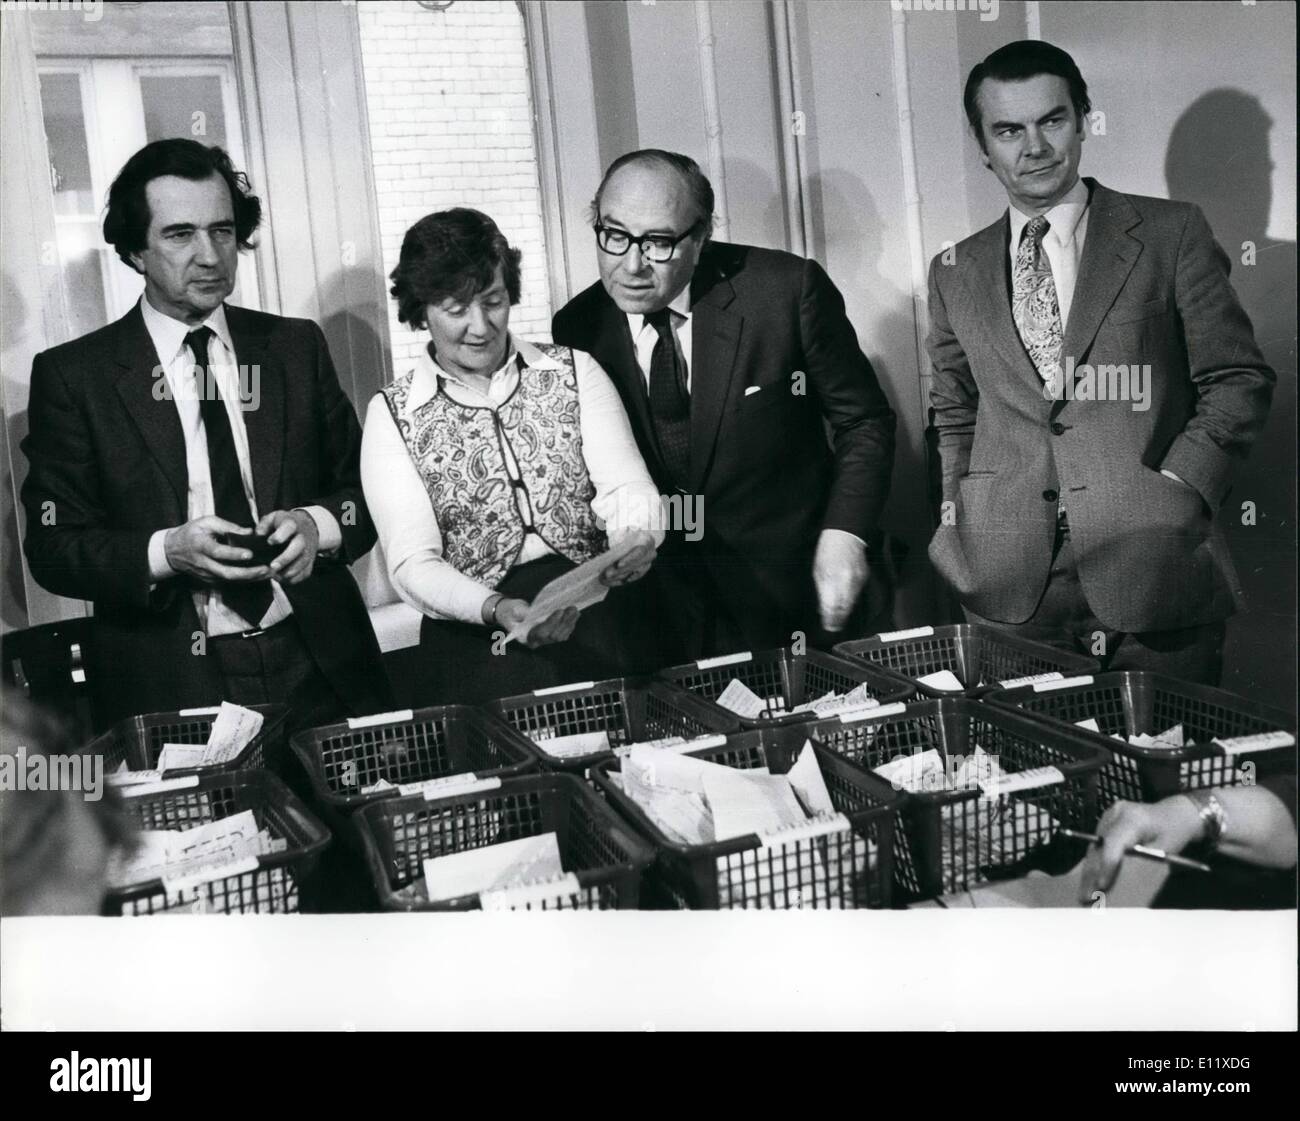 Feb. 02, 1981 - Cash Flows in For Council for Social Democracy.: The founder members of the Council for social Democracy looking at a table full of cheques and postal orders from supporters at the Council's headquarters which was officially opened at 28, Queen Anne's Gate, S.W.L. yesterday. They are from L-R, Mr. William Rodgers, Mrs. Shirley Williams, Mr. Roy Jenkins and Dr. David Owen. Stock Photo